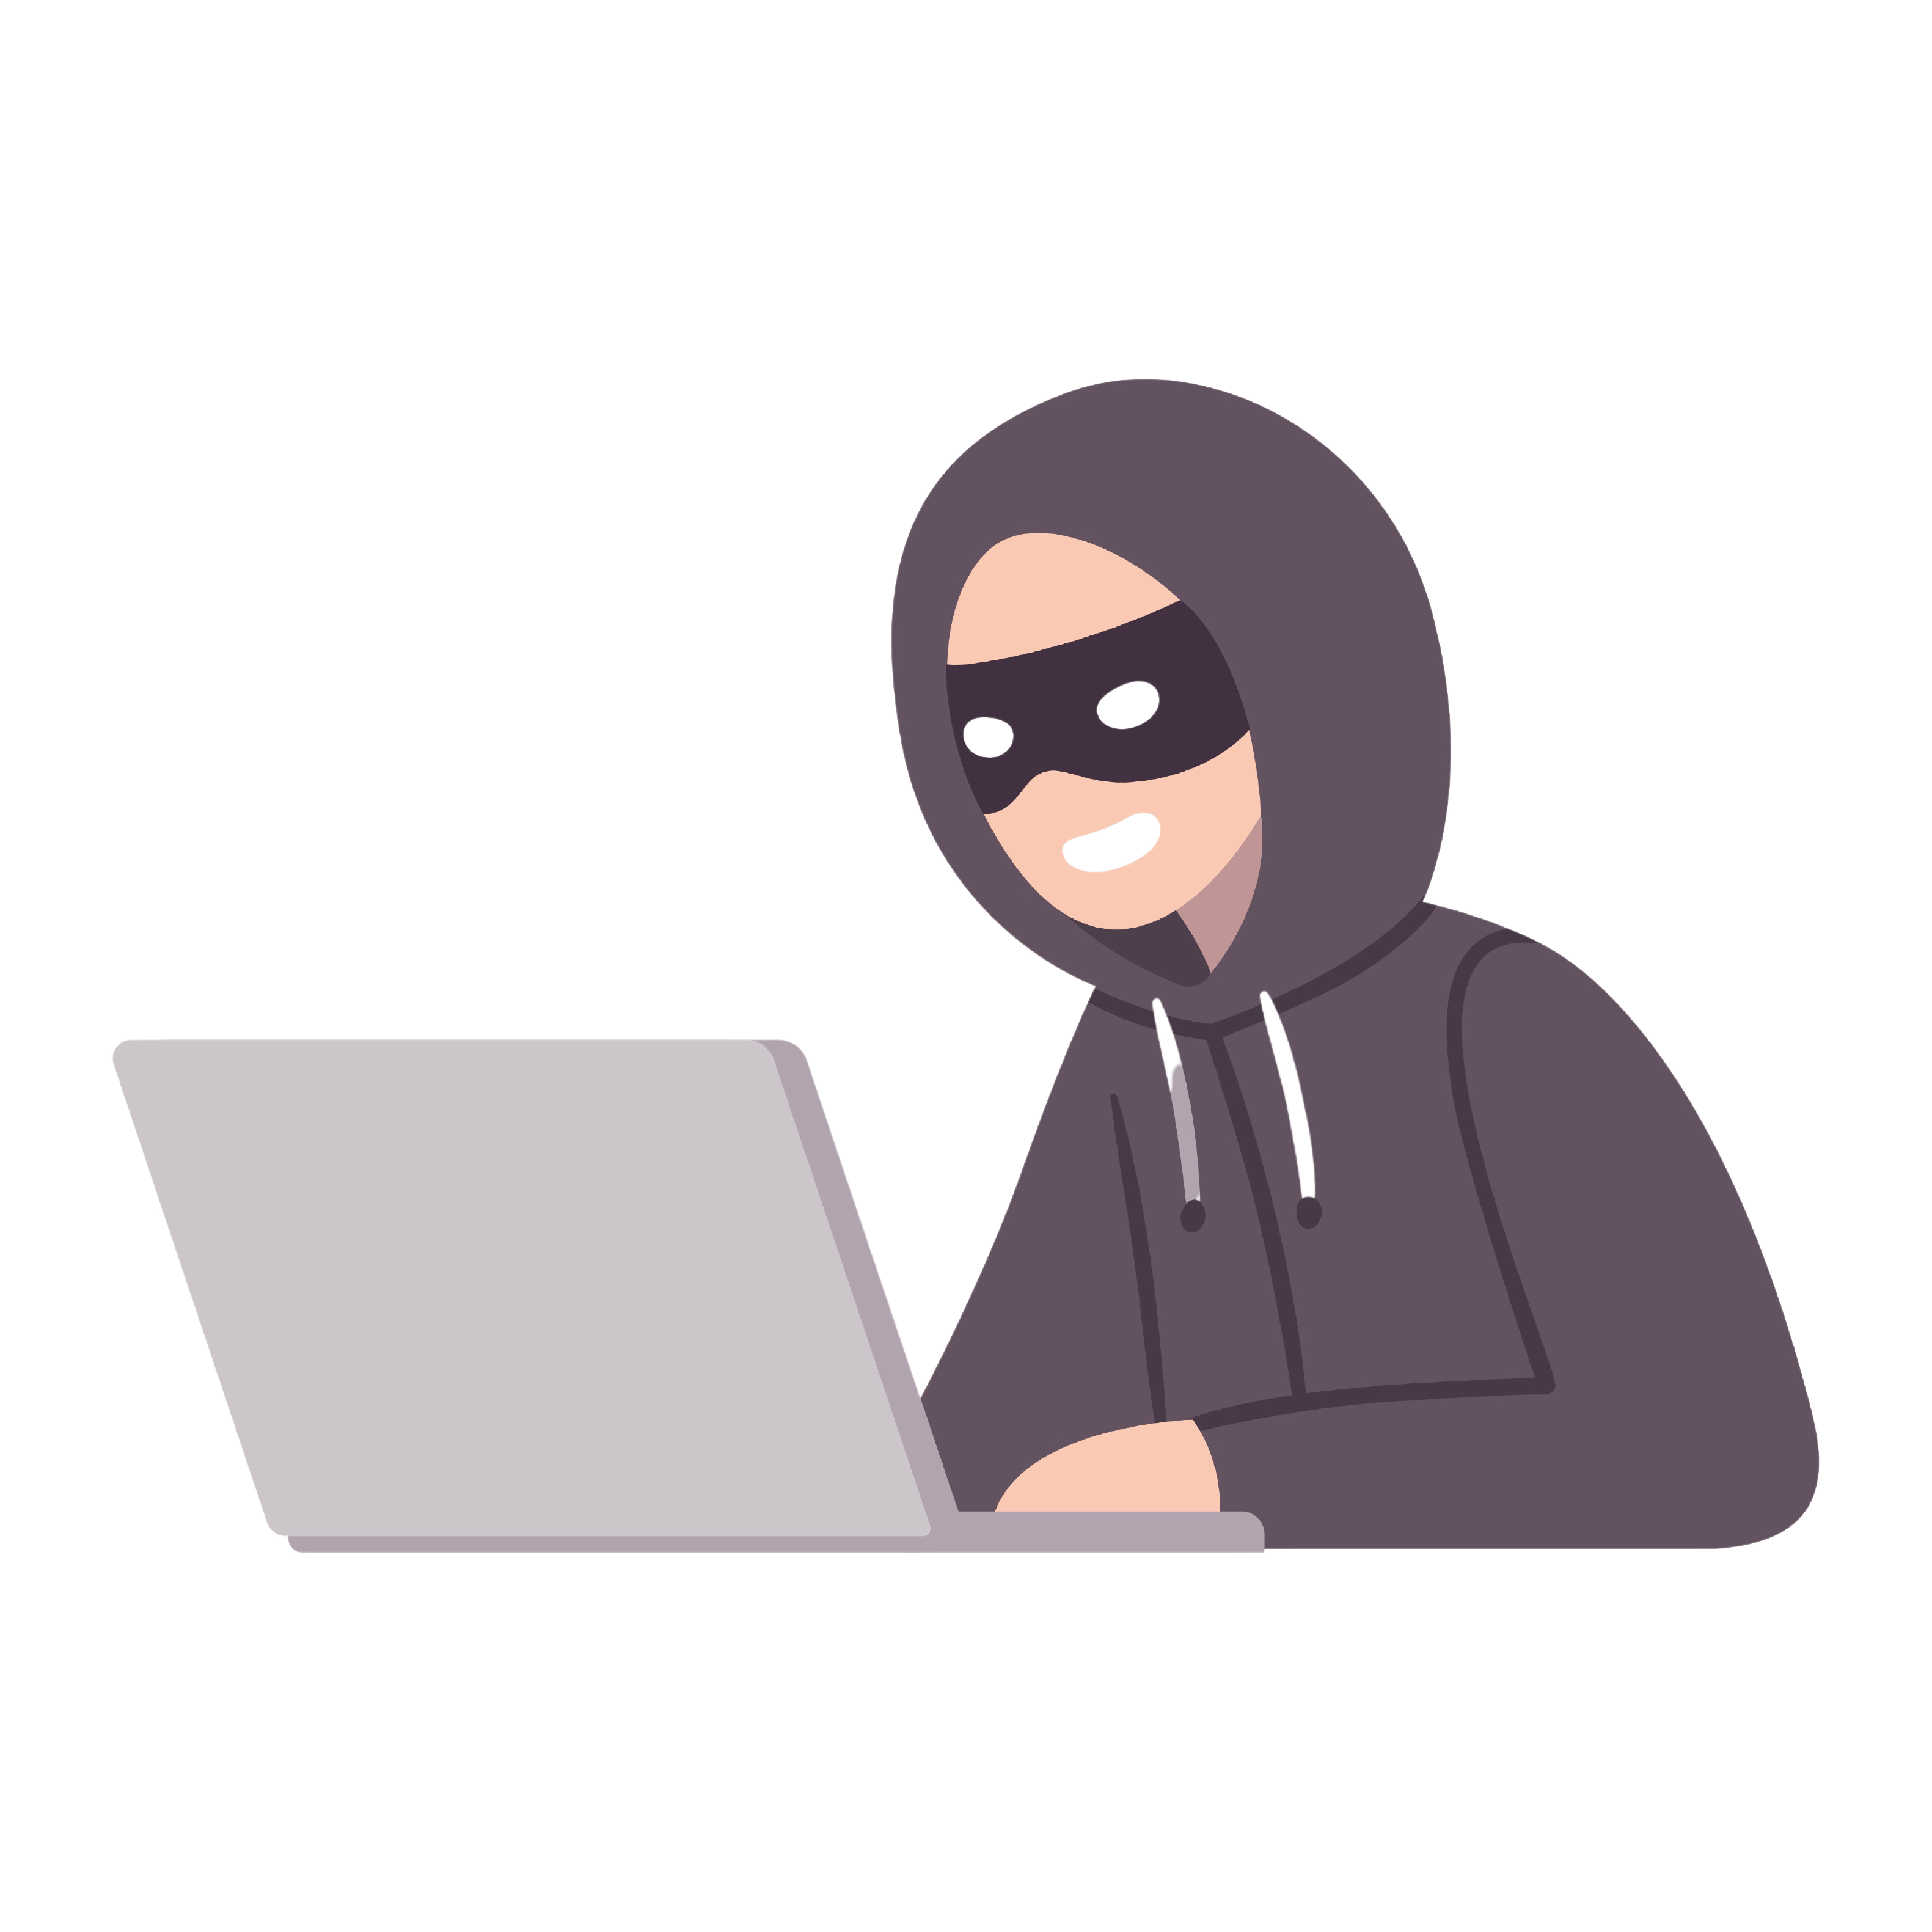 Hacker thief with laptop computer stealing passwords and confidential data. Cyber attack and security vector illustration.